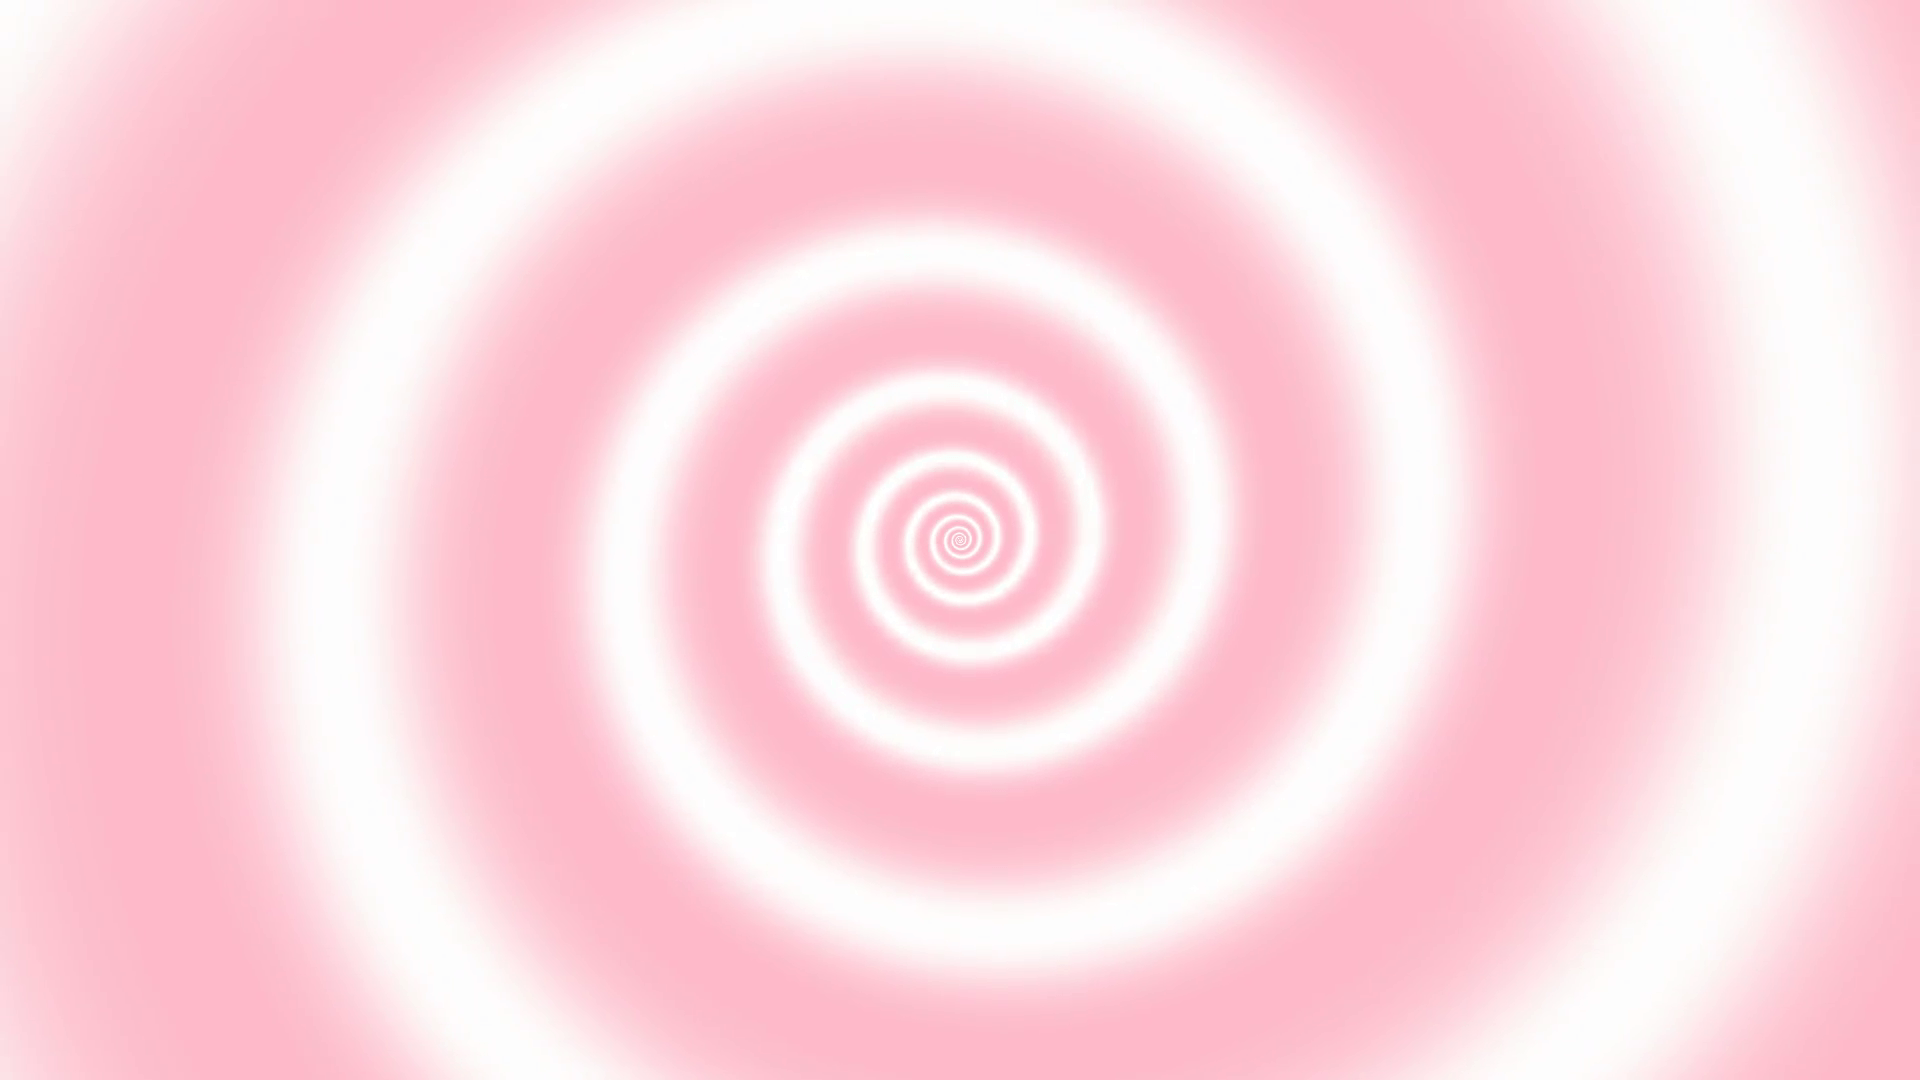 Soft Pink Backgrounds Wallpaper Cave